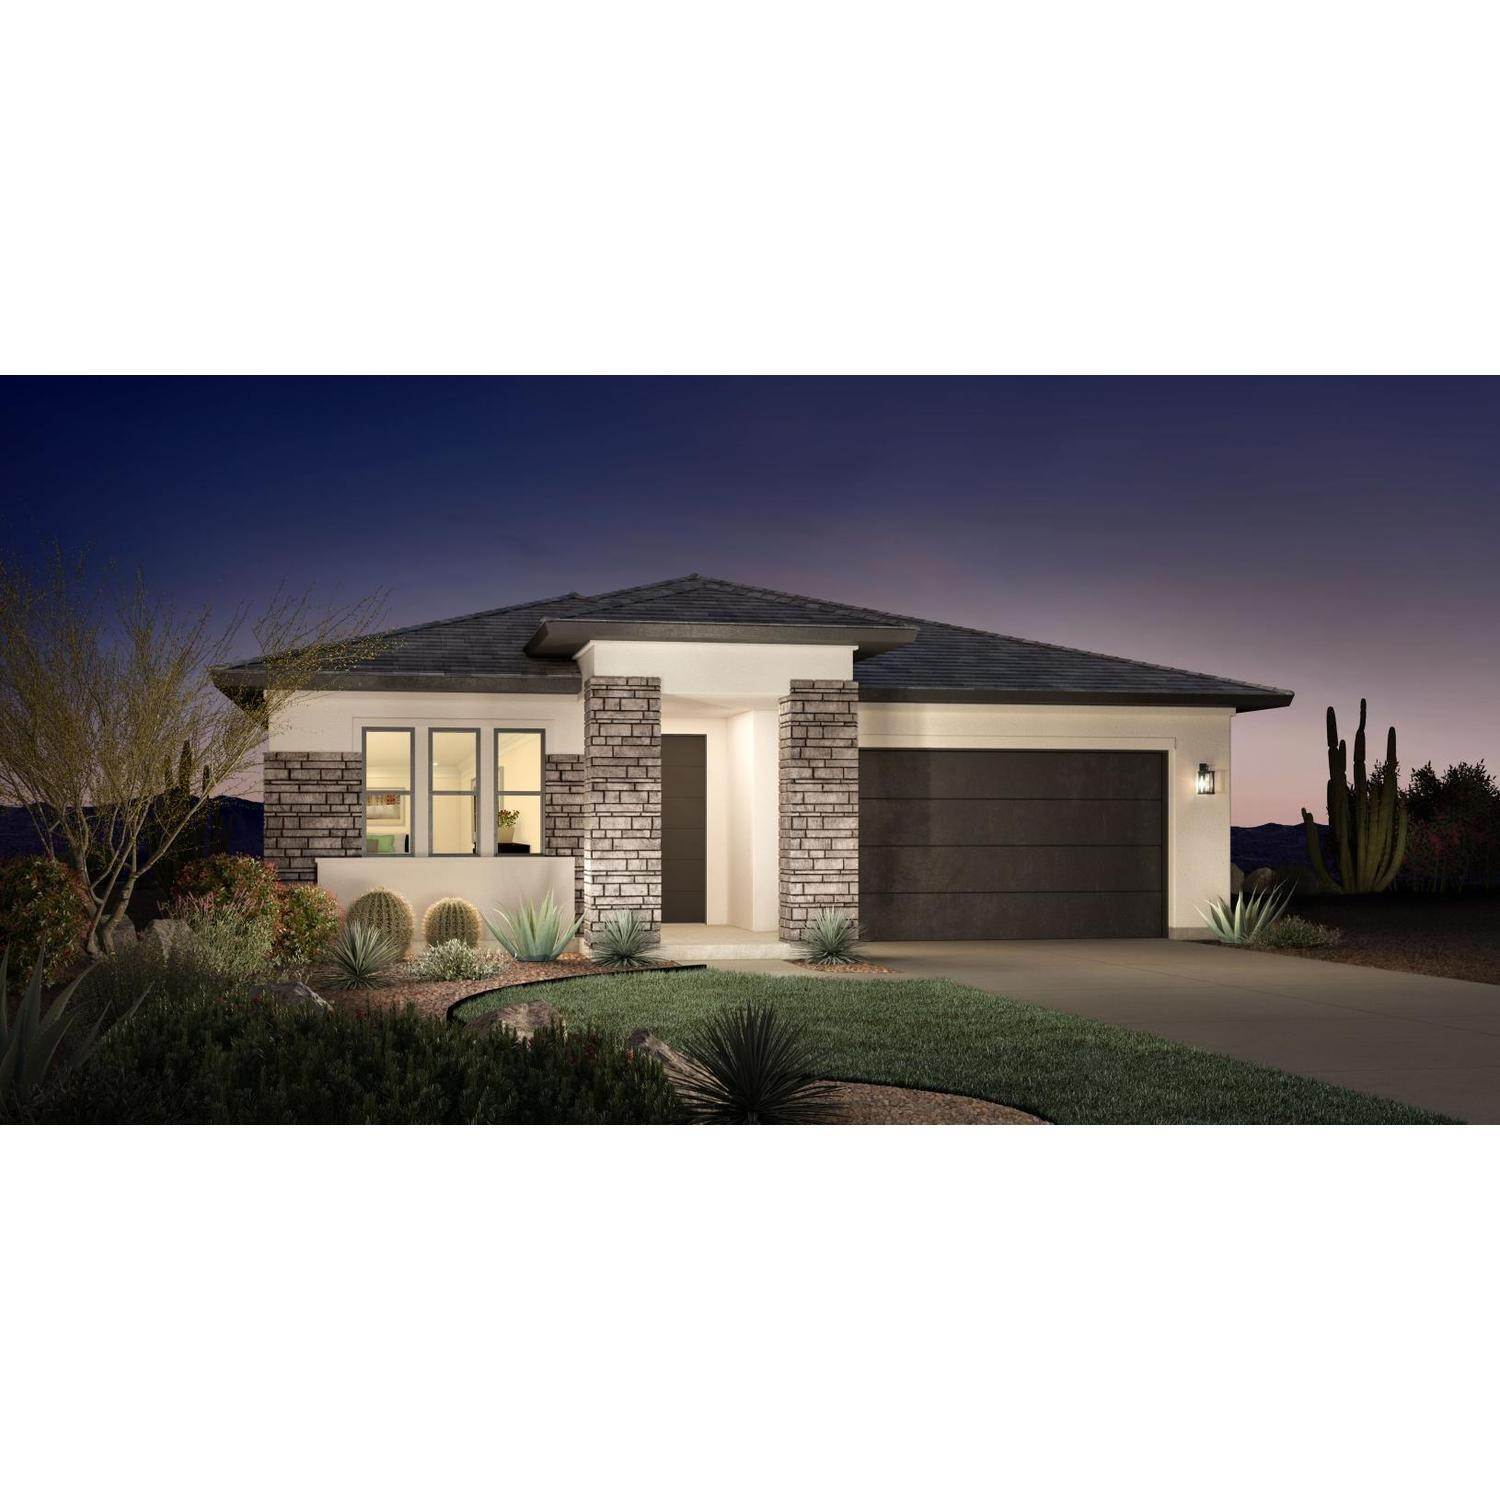 3. Single Family for Sale at Toll Brothers at Cadence - Mosaic Collection 10108 E Tesla Ave, Mesa, AZ 85212